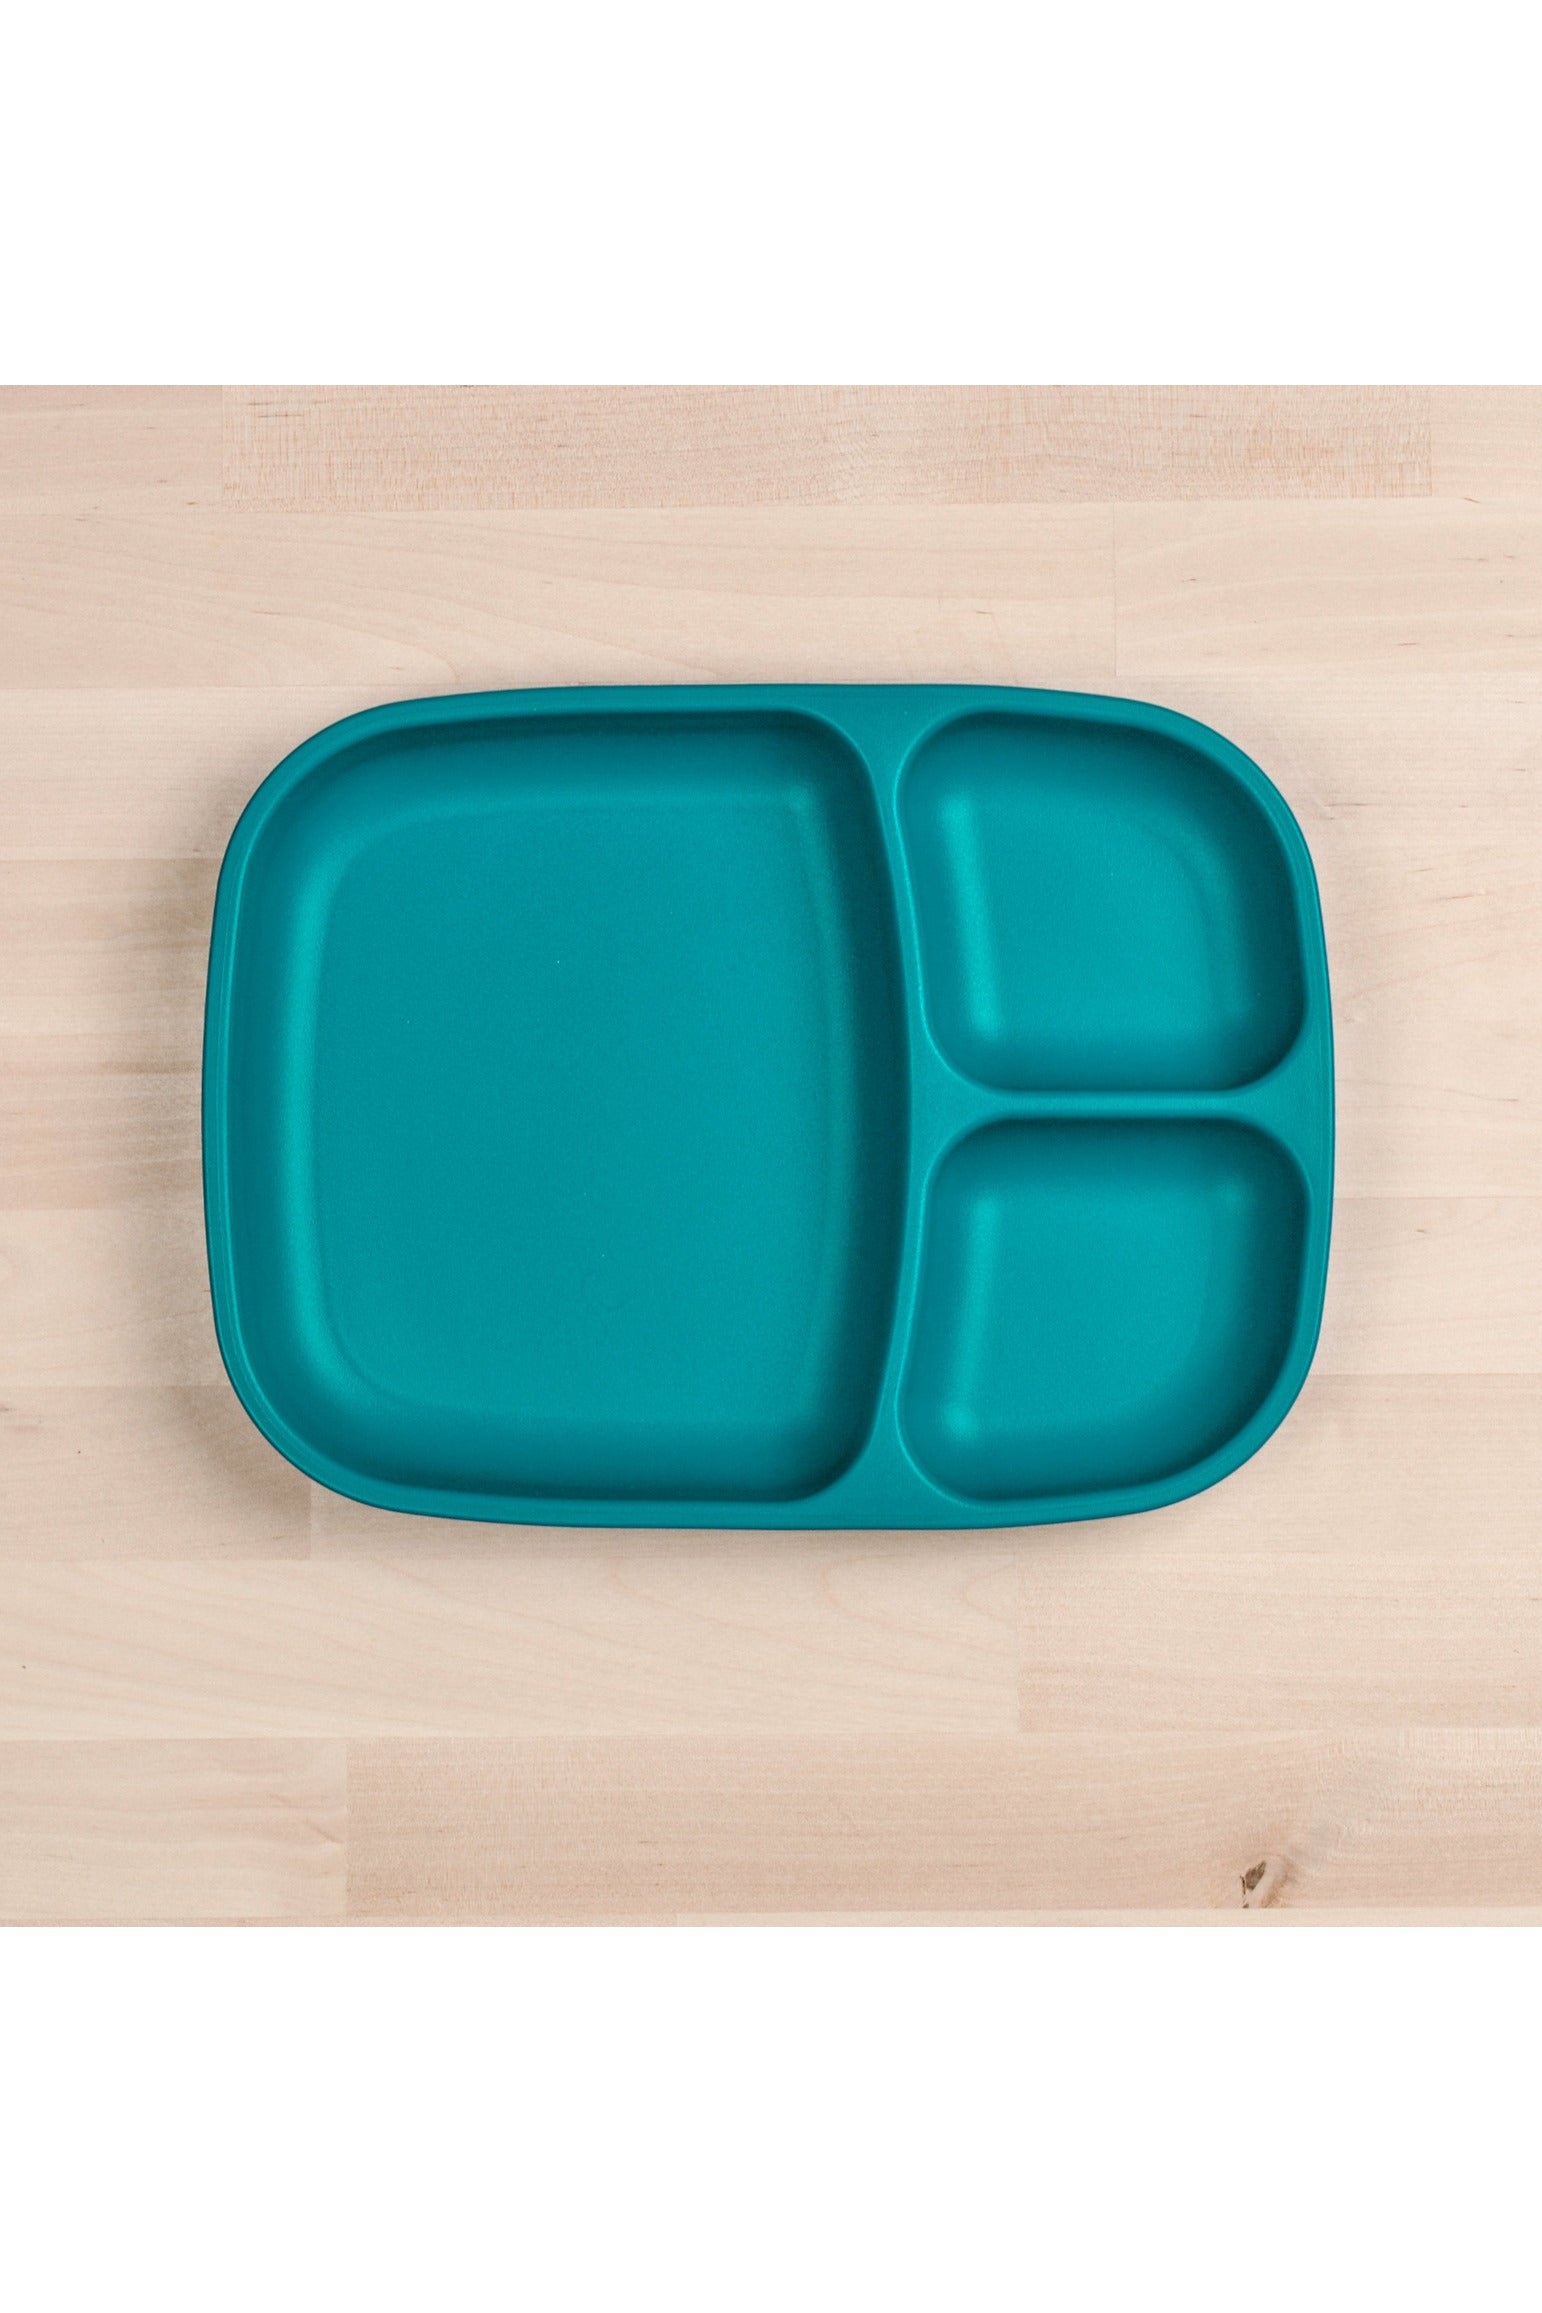 Re-Play Divided Tray - Teal